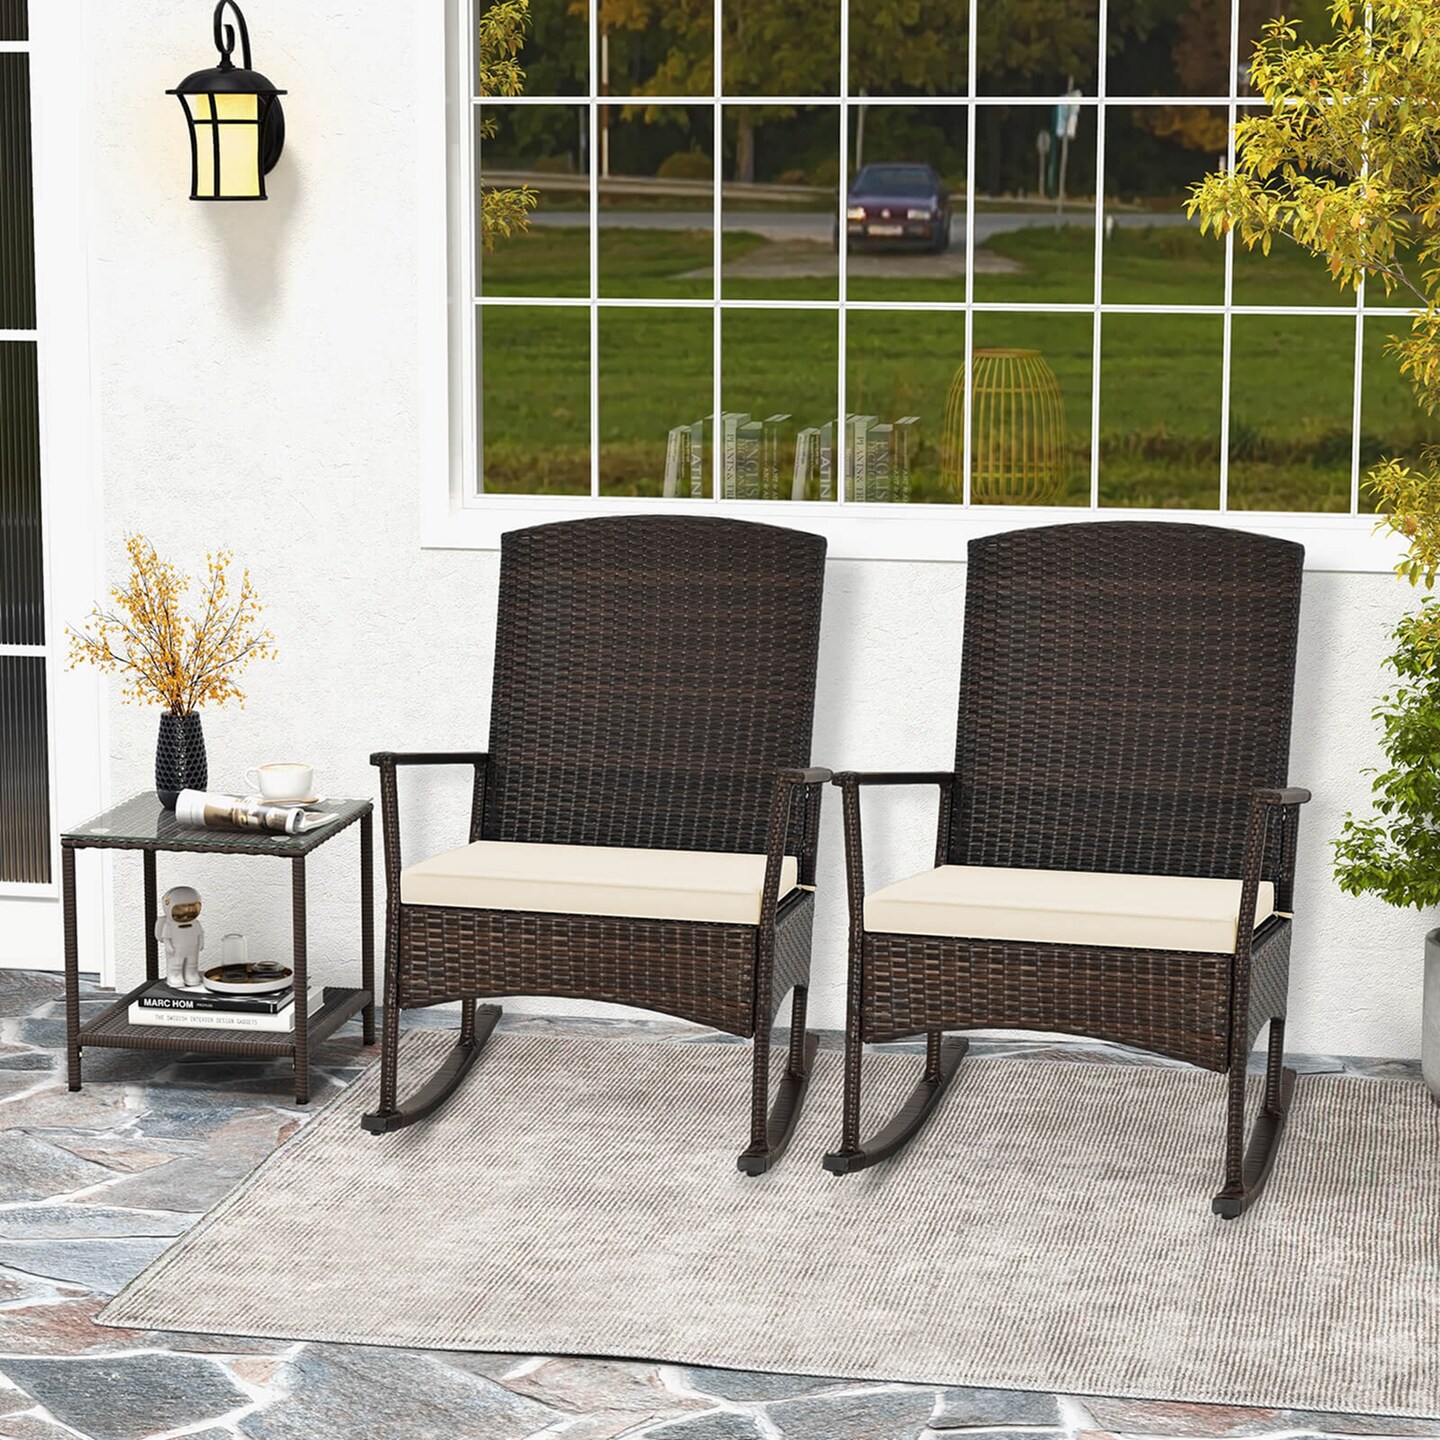 Costway 3 Piece Patio Rocking Set Wicker Rocking Chairs with 2-Tier Coffee Table Turquoise/Off White